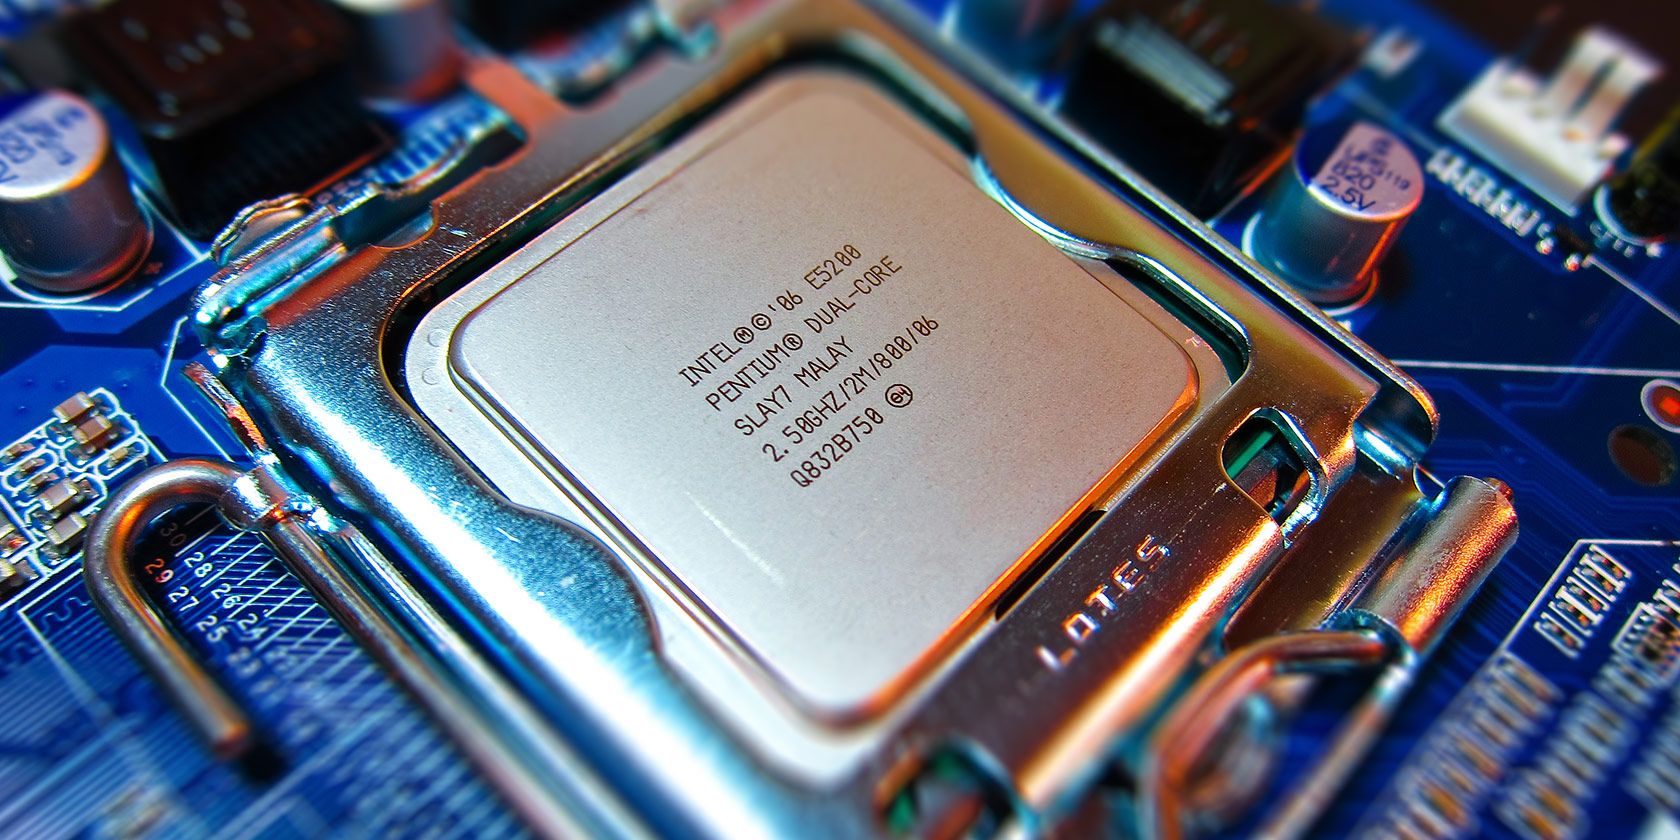 So What's the Difference Between Intel's Haswell and Ivy Bridge CPUs?